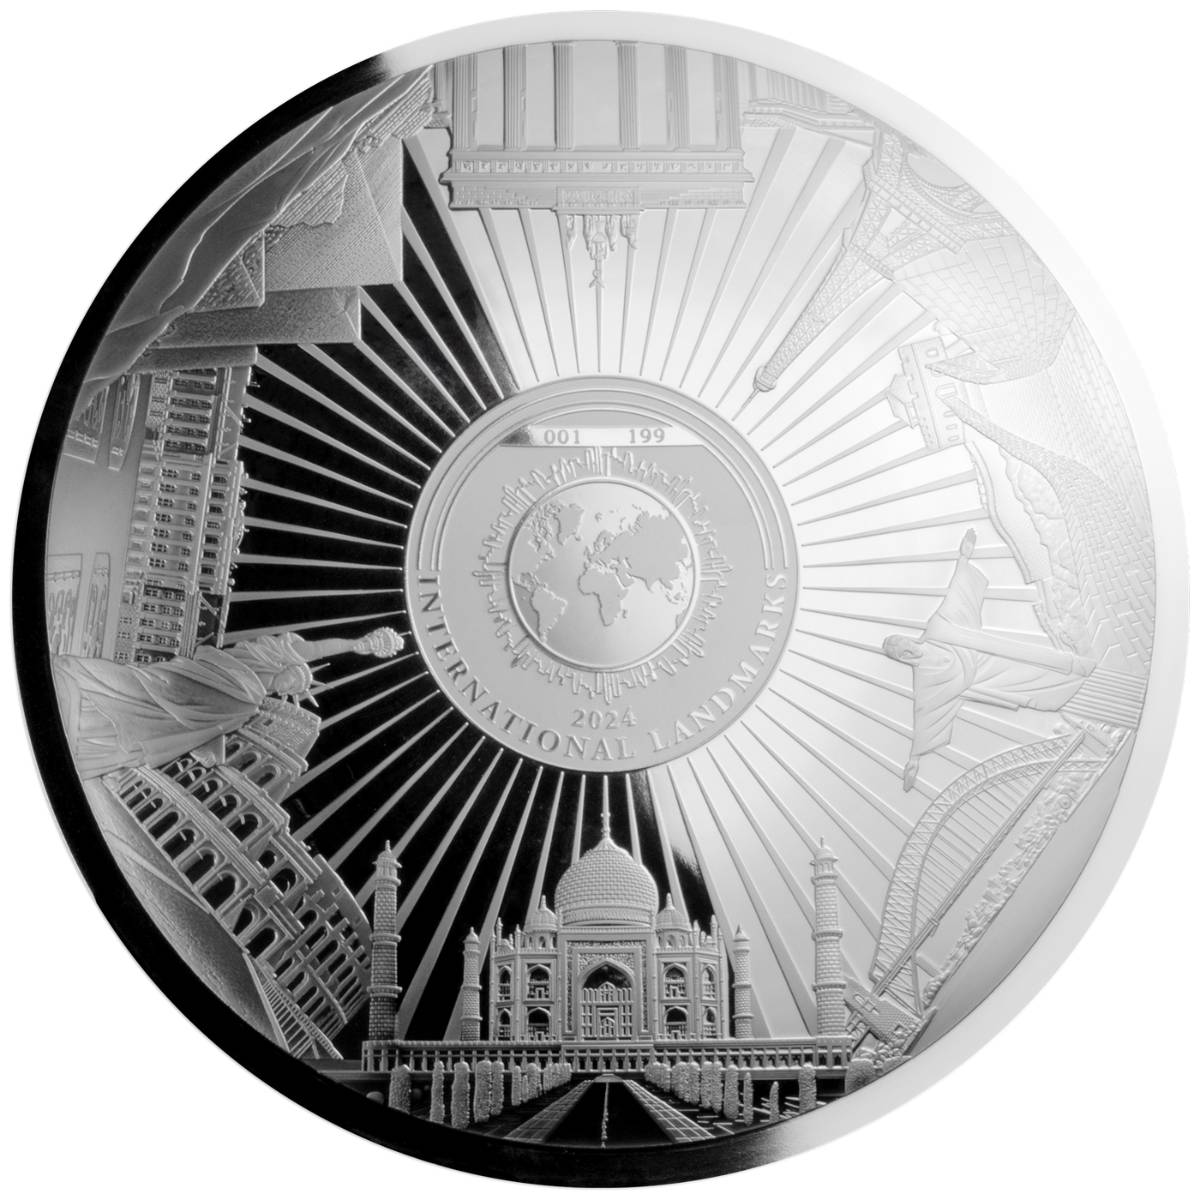 Landmarks of the World 2024 $25 Curved Kilo Silver Prooflike Coin